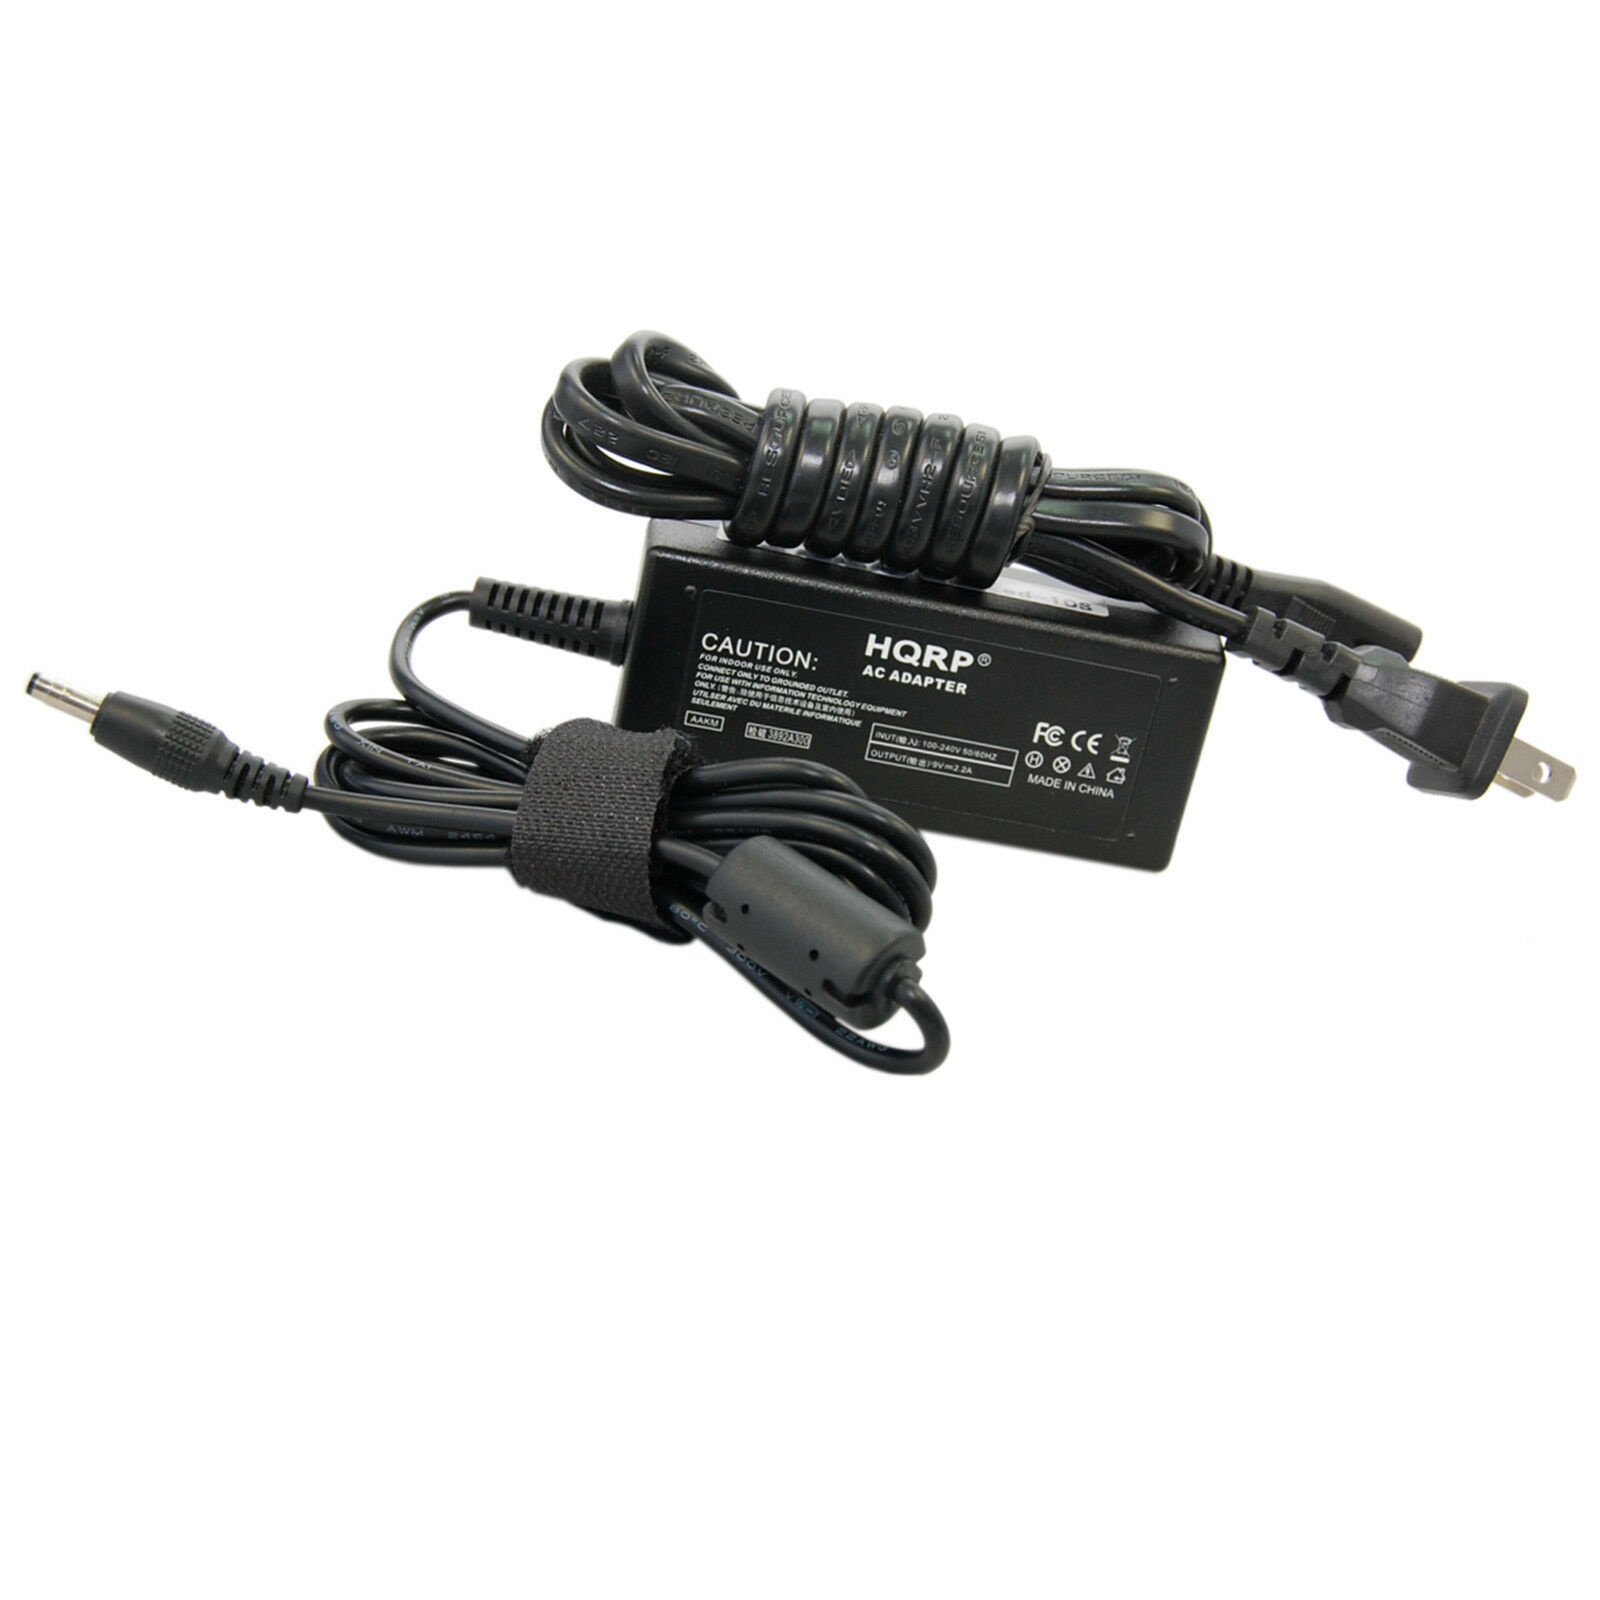 NEW 36V AC Adapter For Kodak All-In-One InkJet Printer Power Supply Cord Charger 1 AC input voltage ……100-240VAC (World